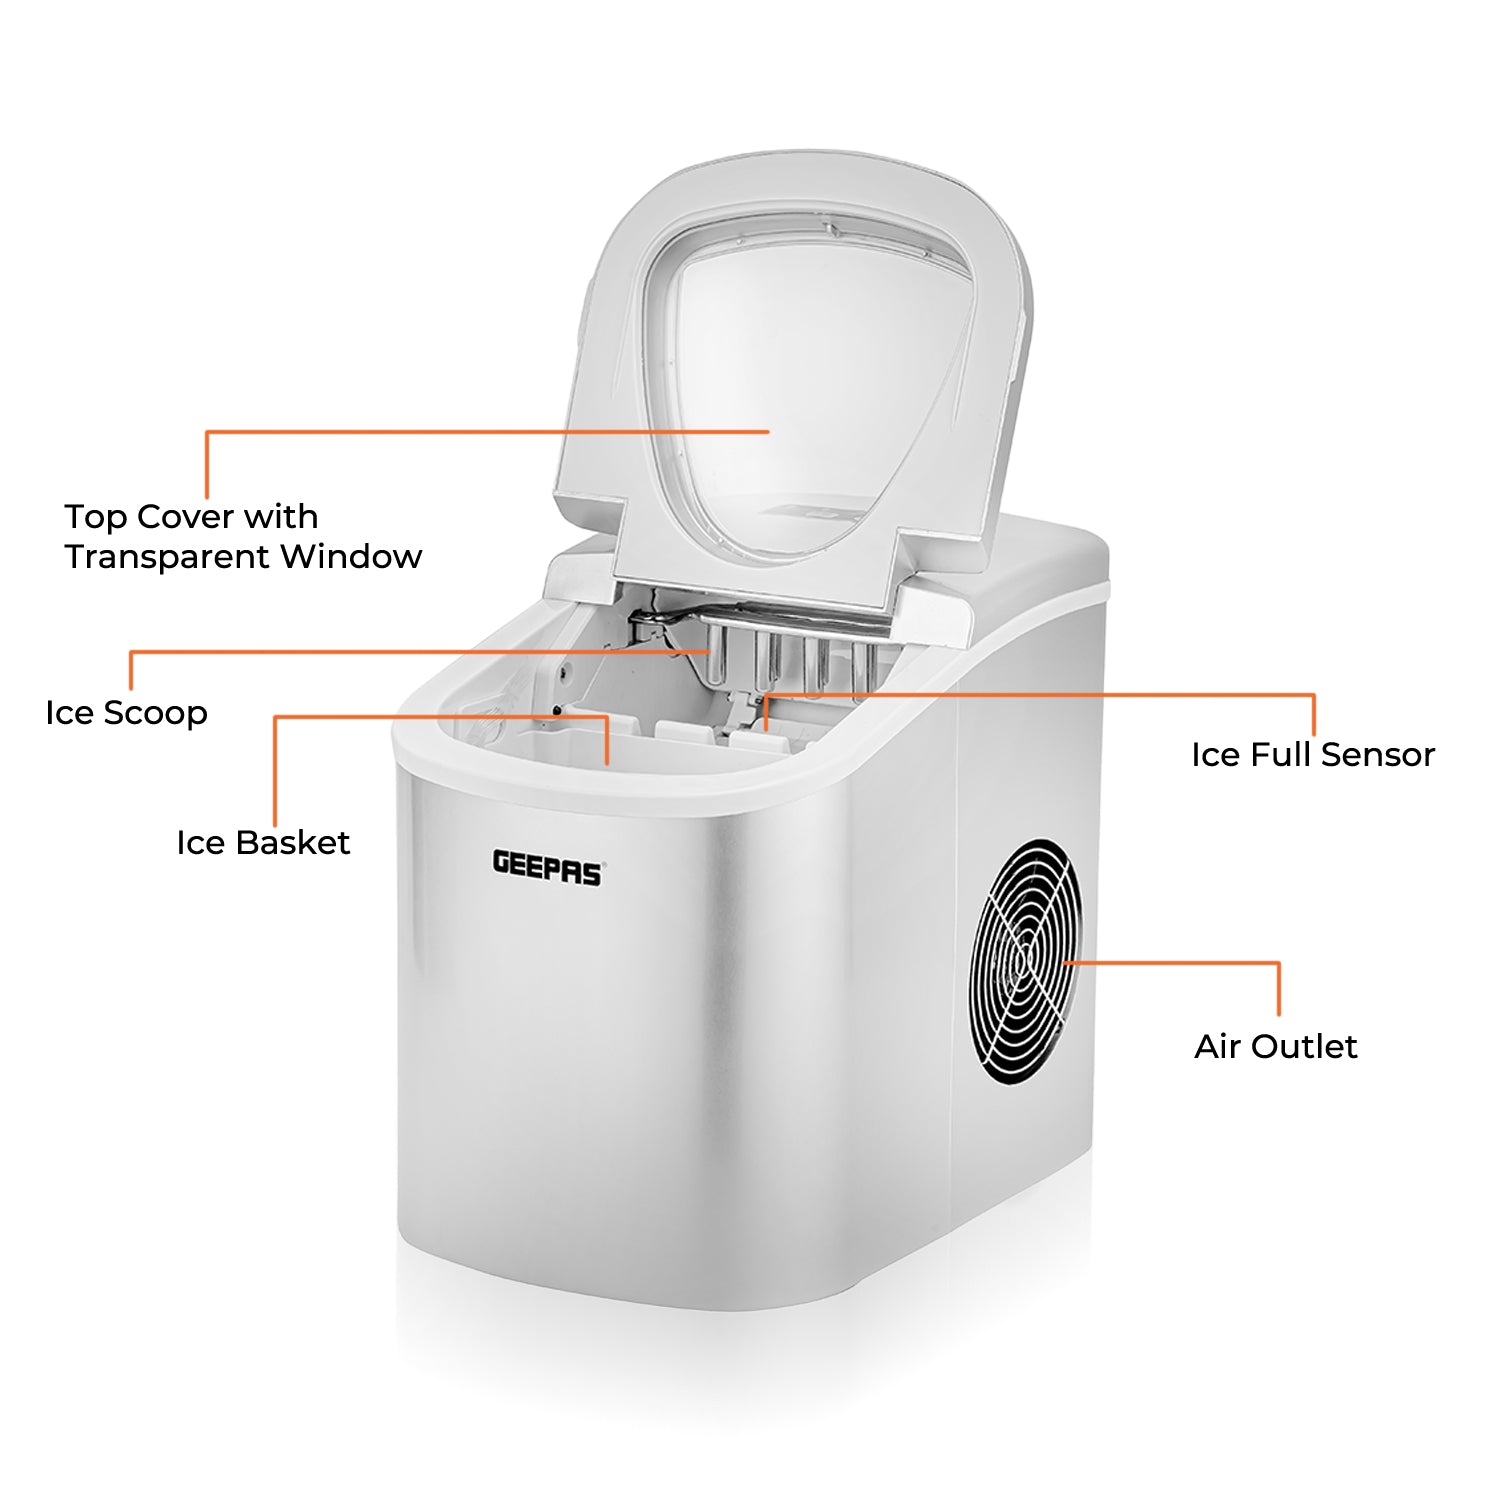 This image shows a breakdown of the ice cube maker, the top cover with the transparent window, the ice scoop and basket, ice creating sensor, air outlet.